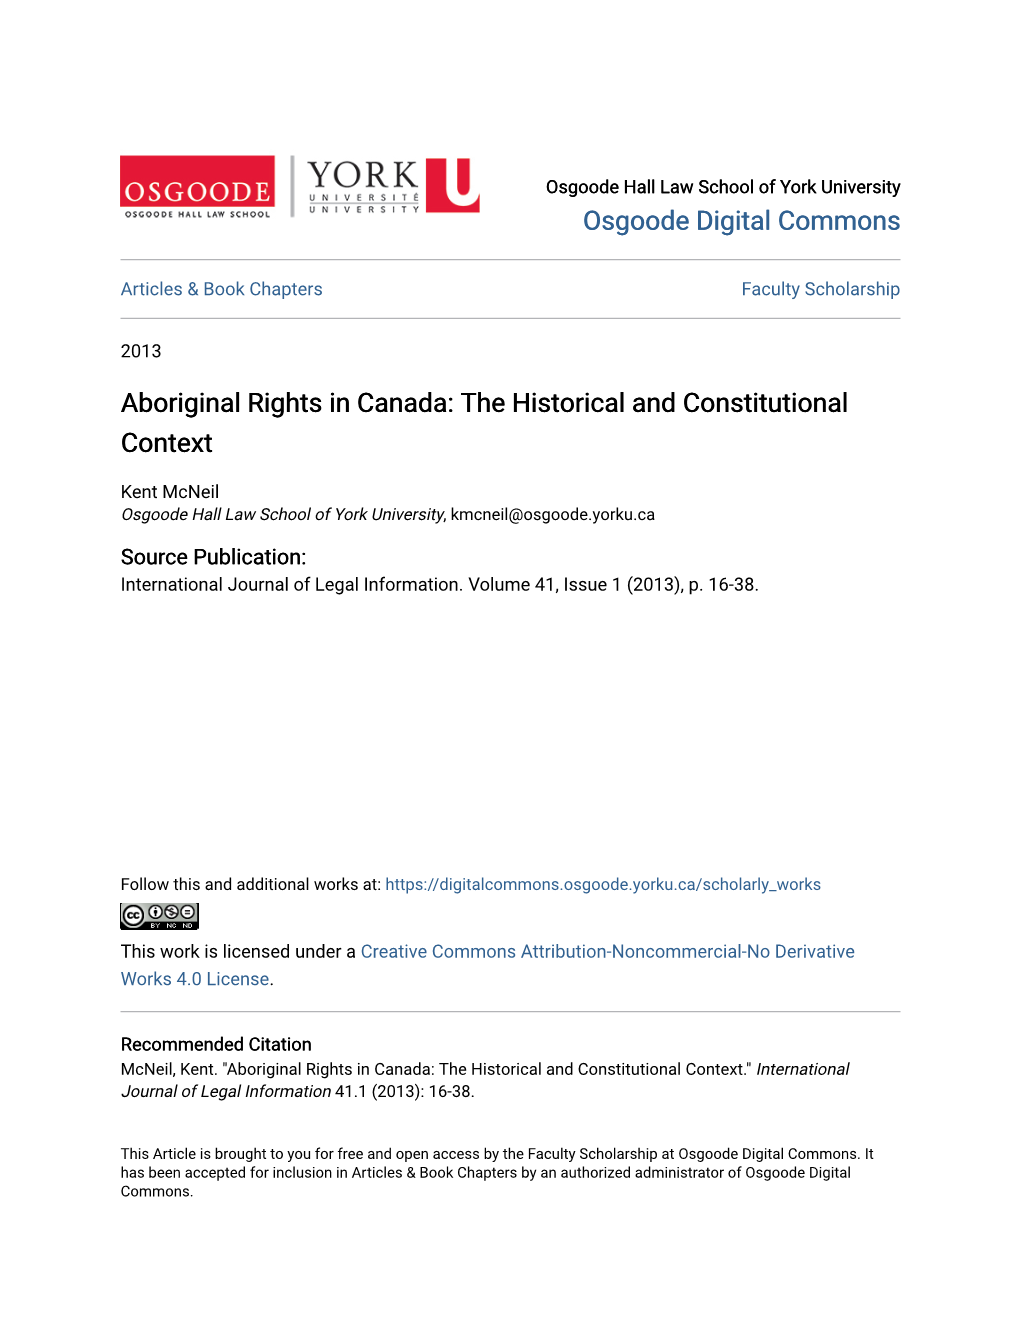 Aboriginal Rights in Canada: the Historical and Constitutional Context